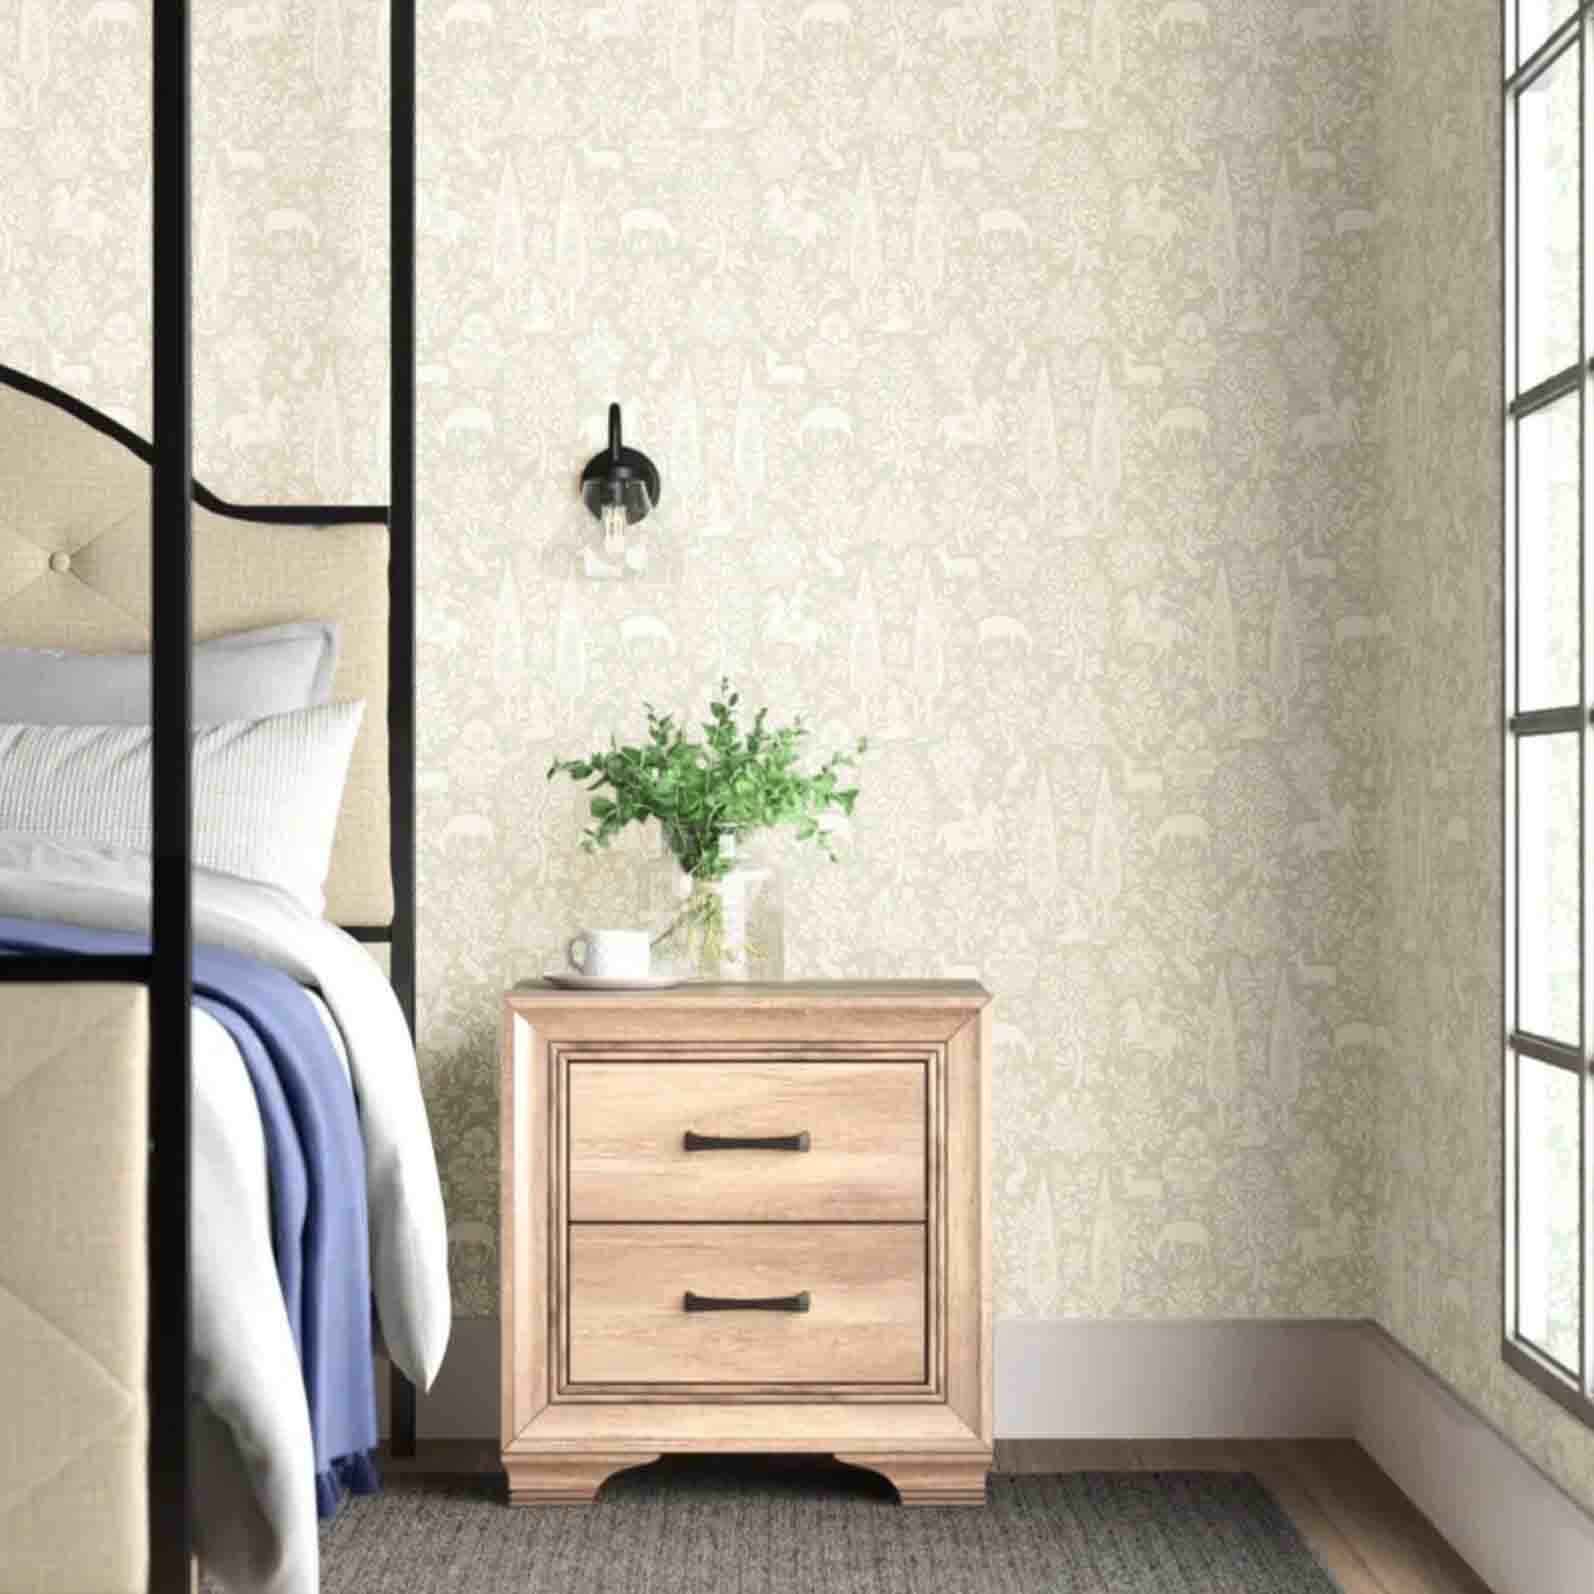 Quincey floral wallpaper in cream color